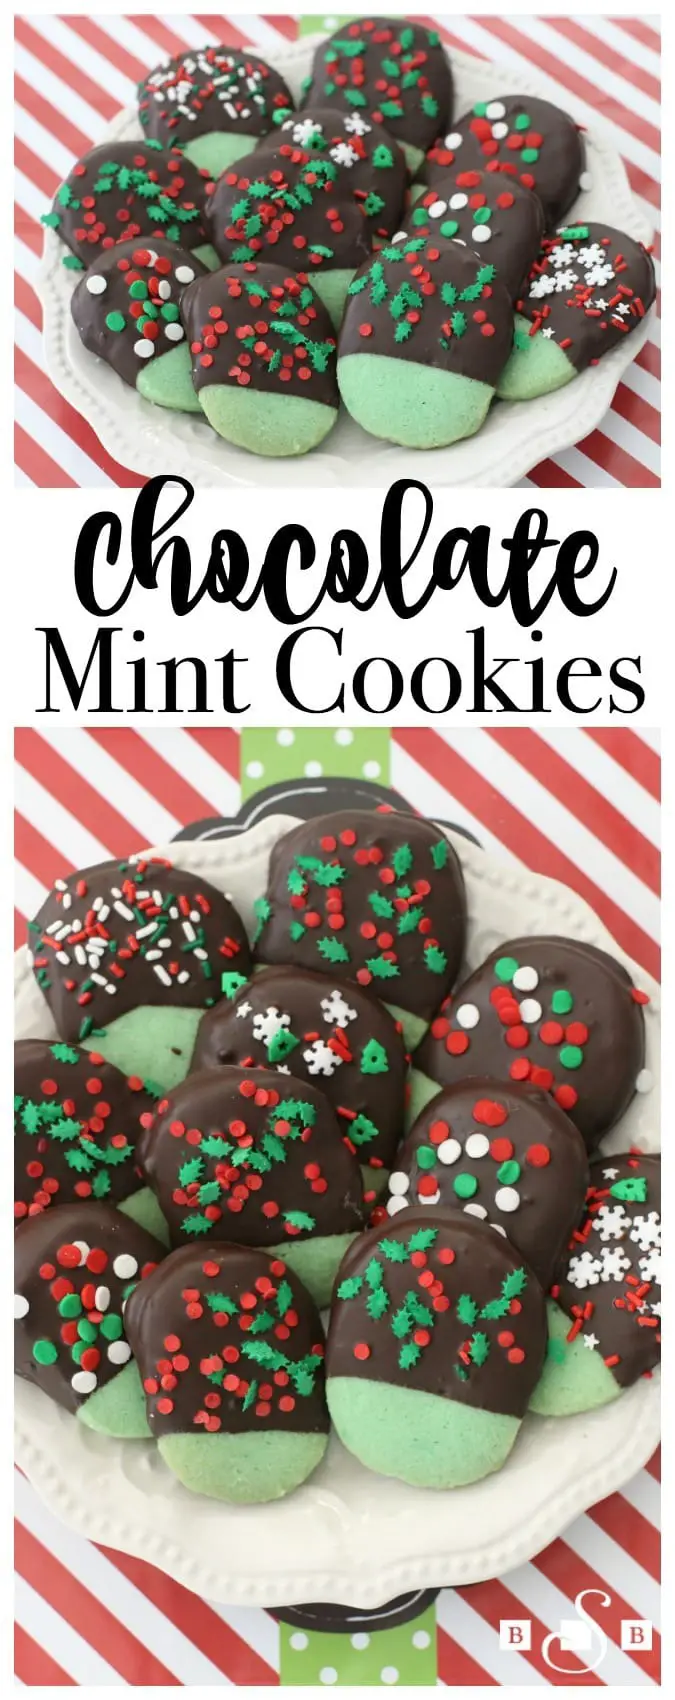 20+ Delicious Cookie Recipes and Ideas, Delicious Chocolate Mint Cookies